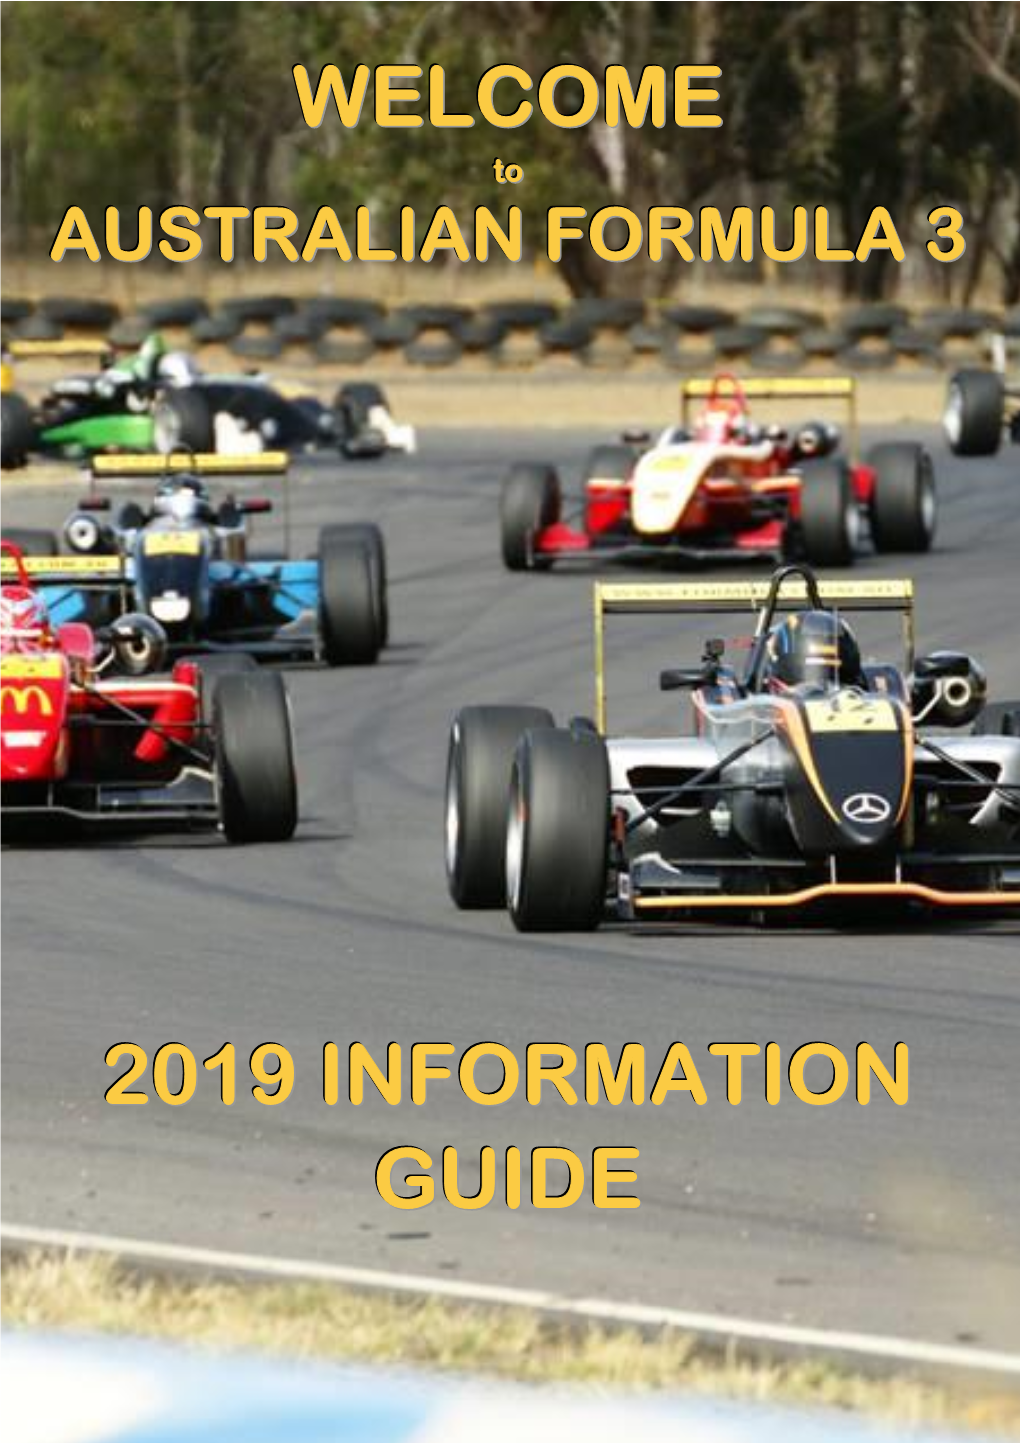 2019 Information Guide